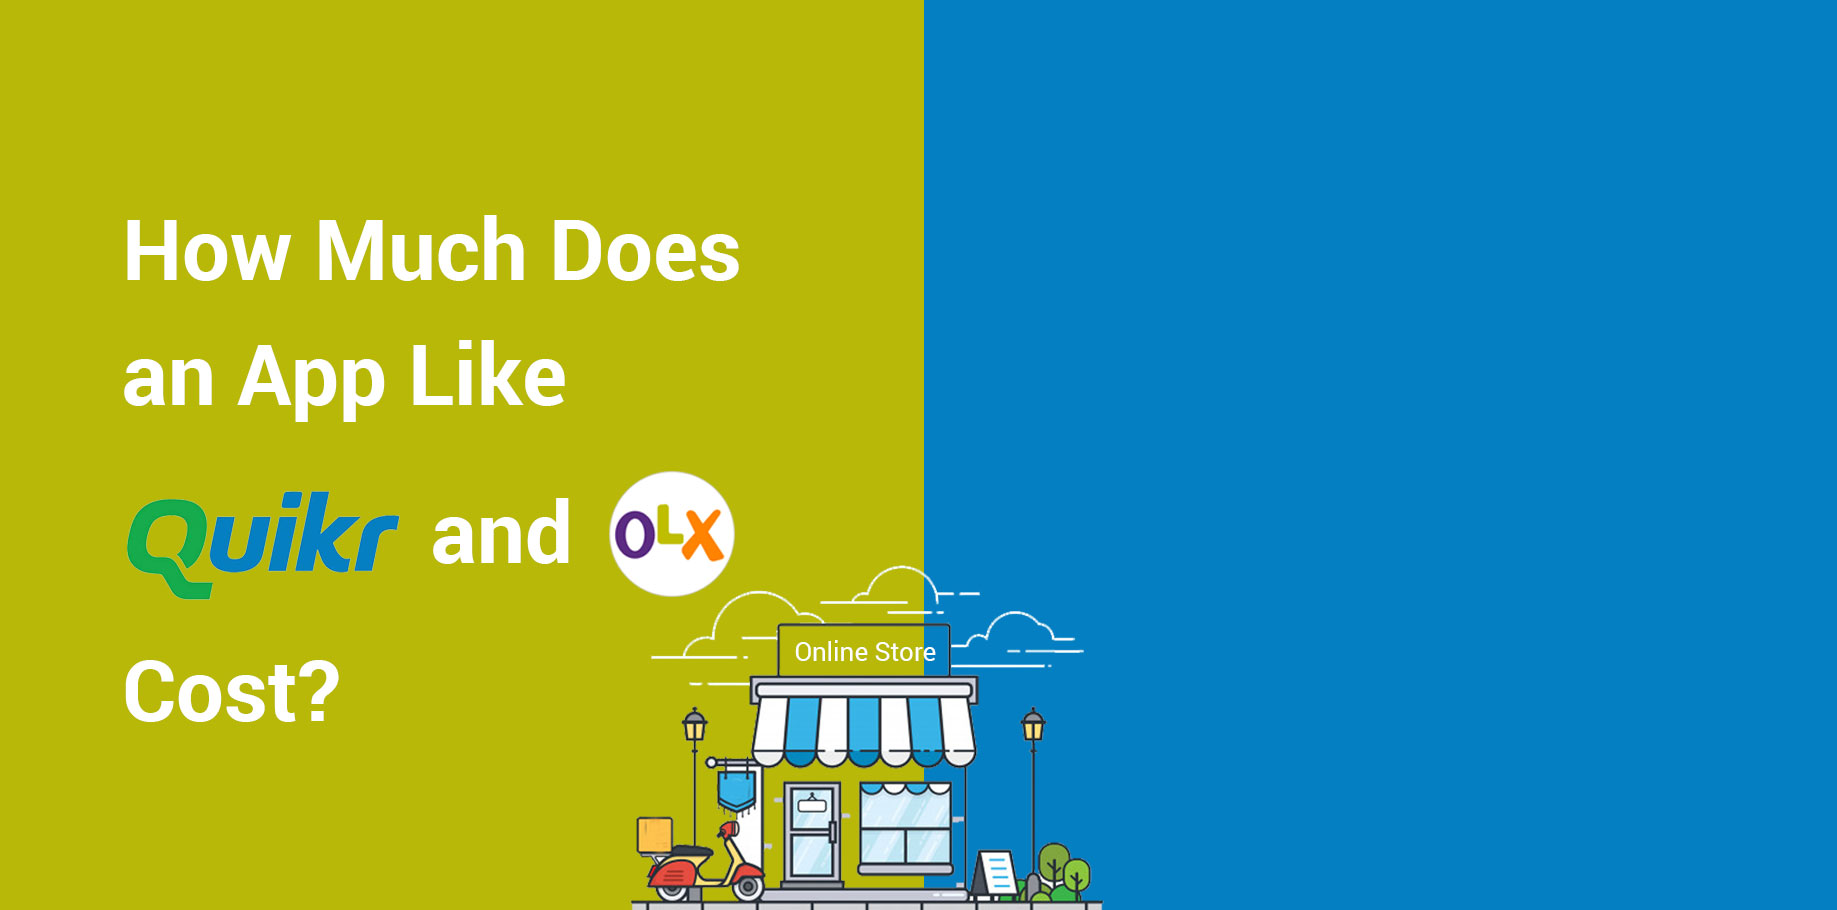 How Much Does It Cost to Develop A Classified App like OLX/Quikr?